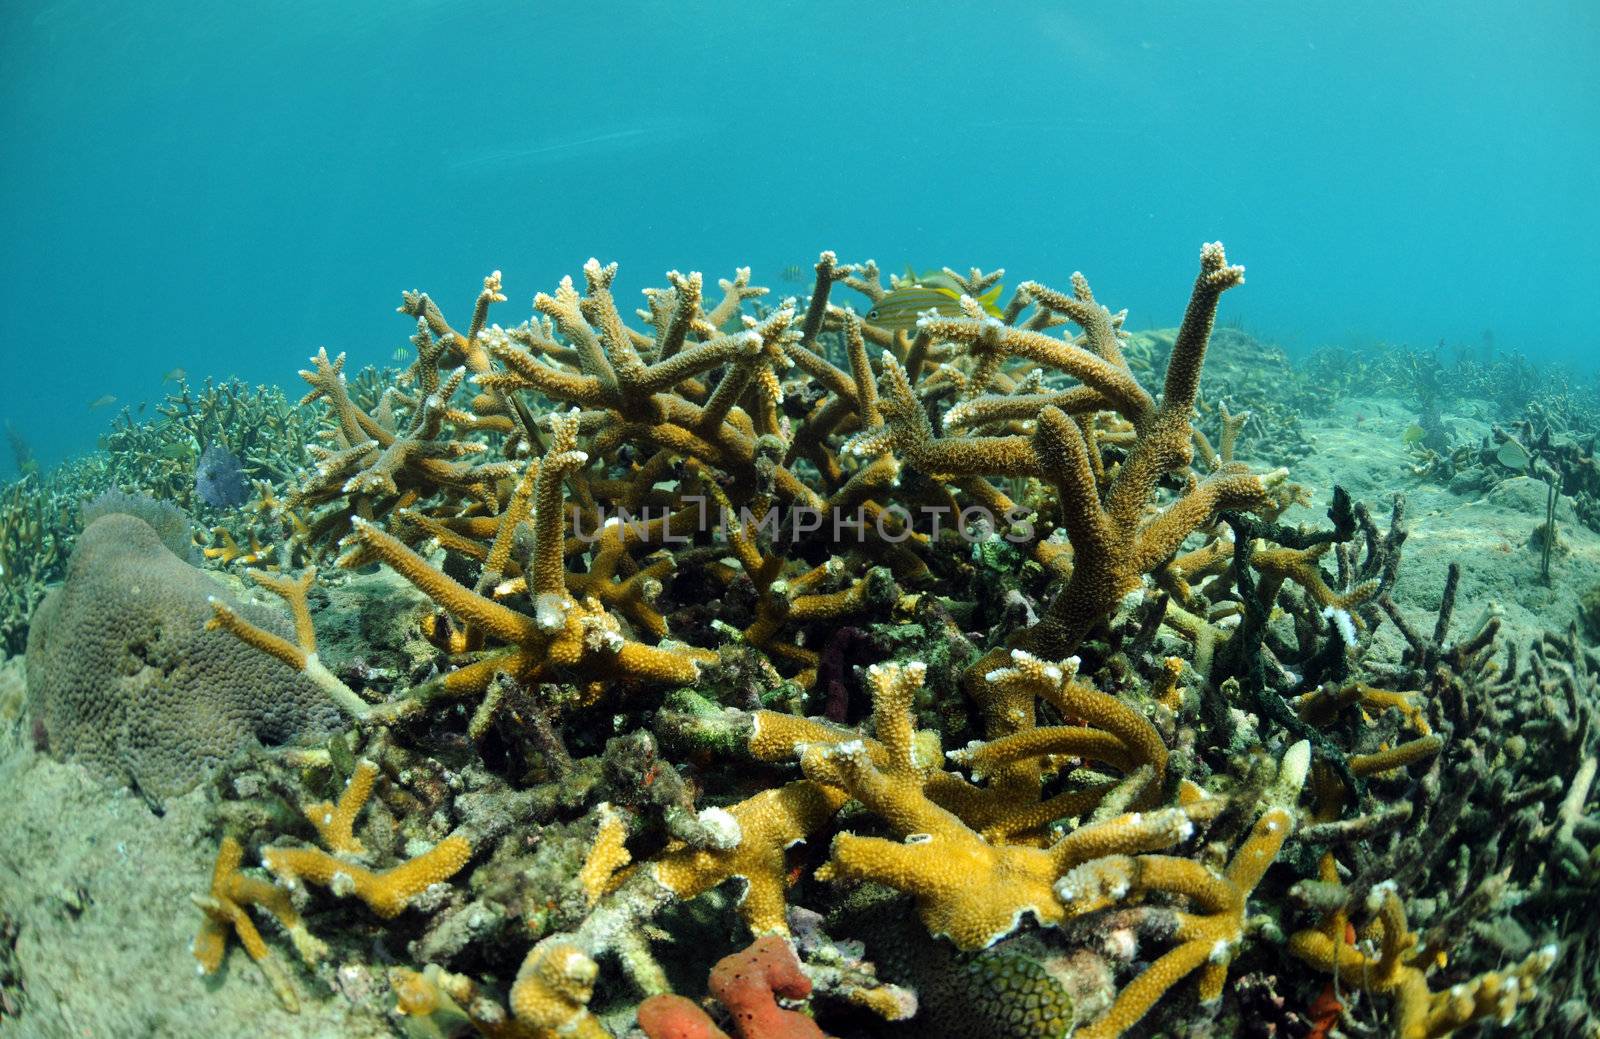 Beautiful seascape of staghorn coral on a coral reef in Atlantic Ocean with fish